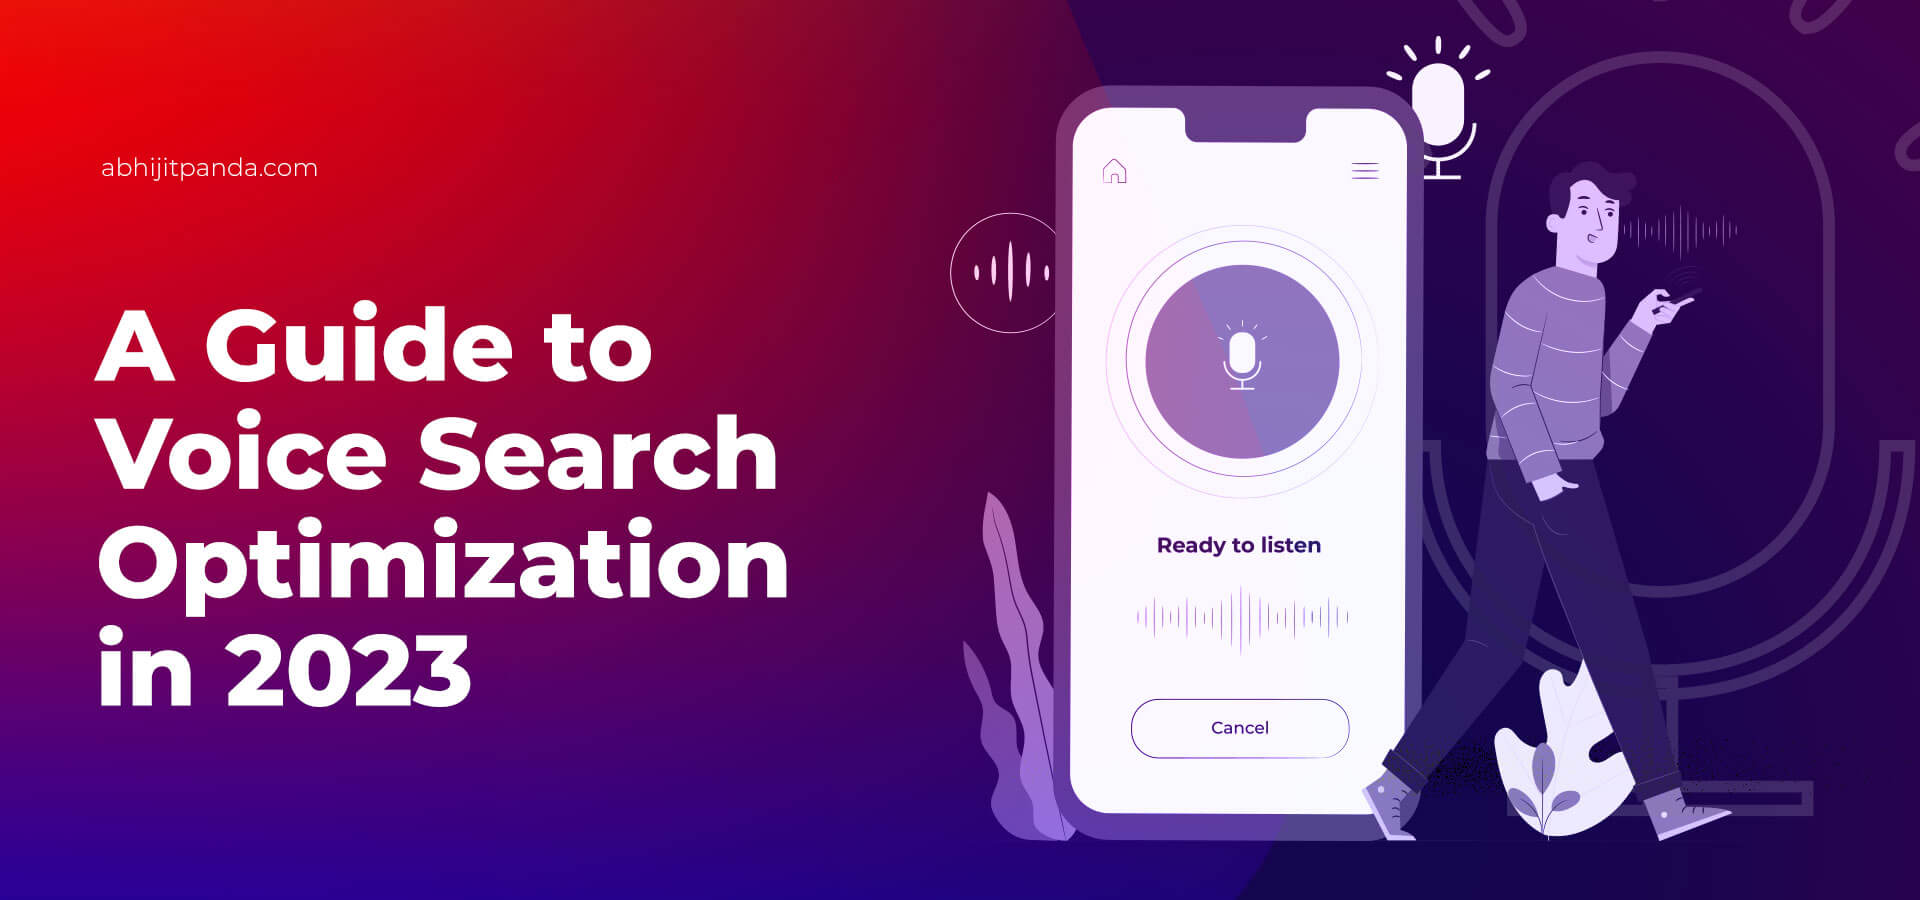 A Guide to Voice Search Optimization in 2023